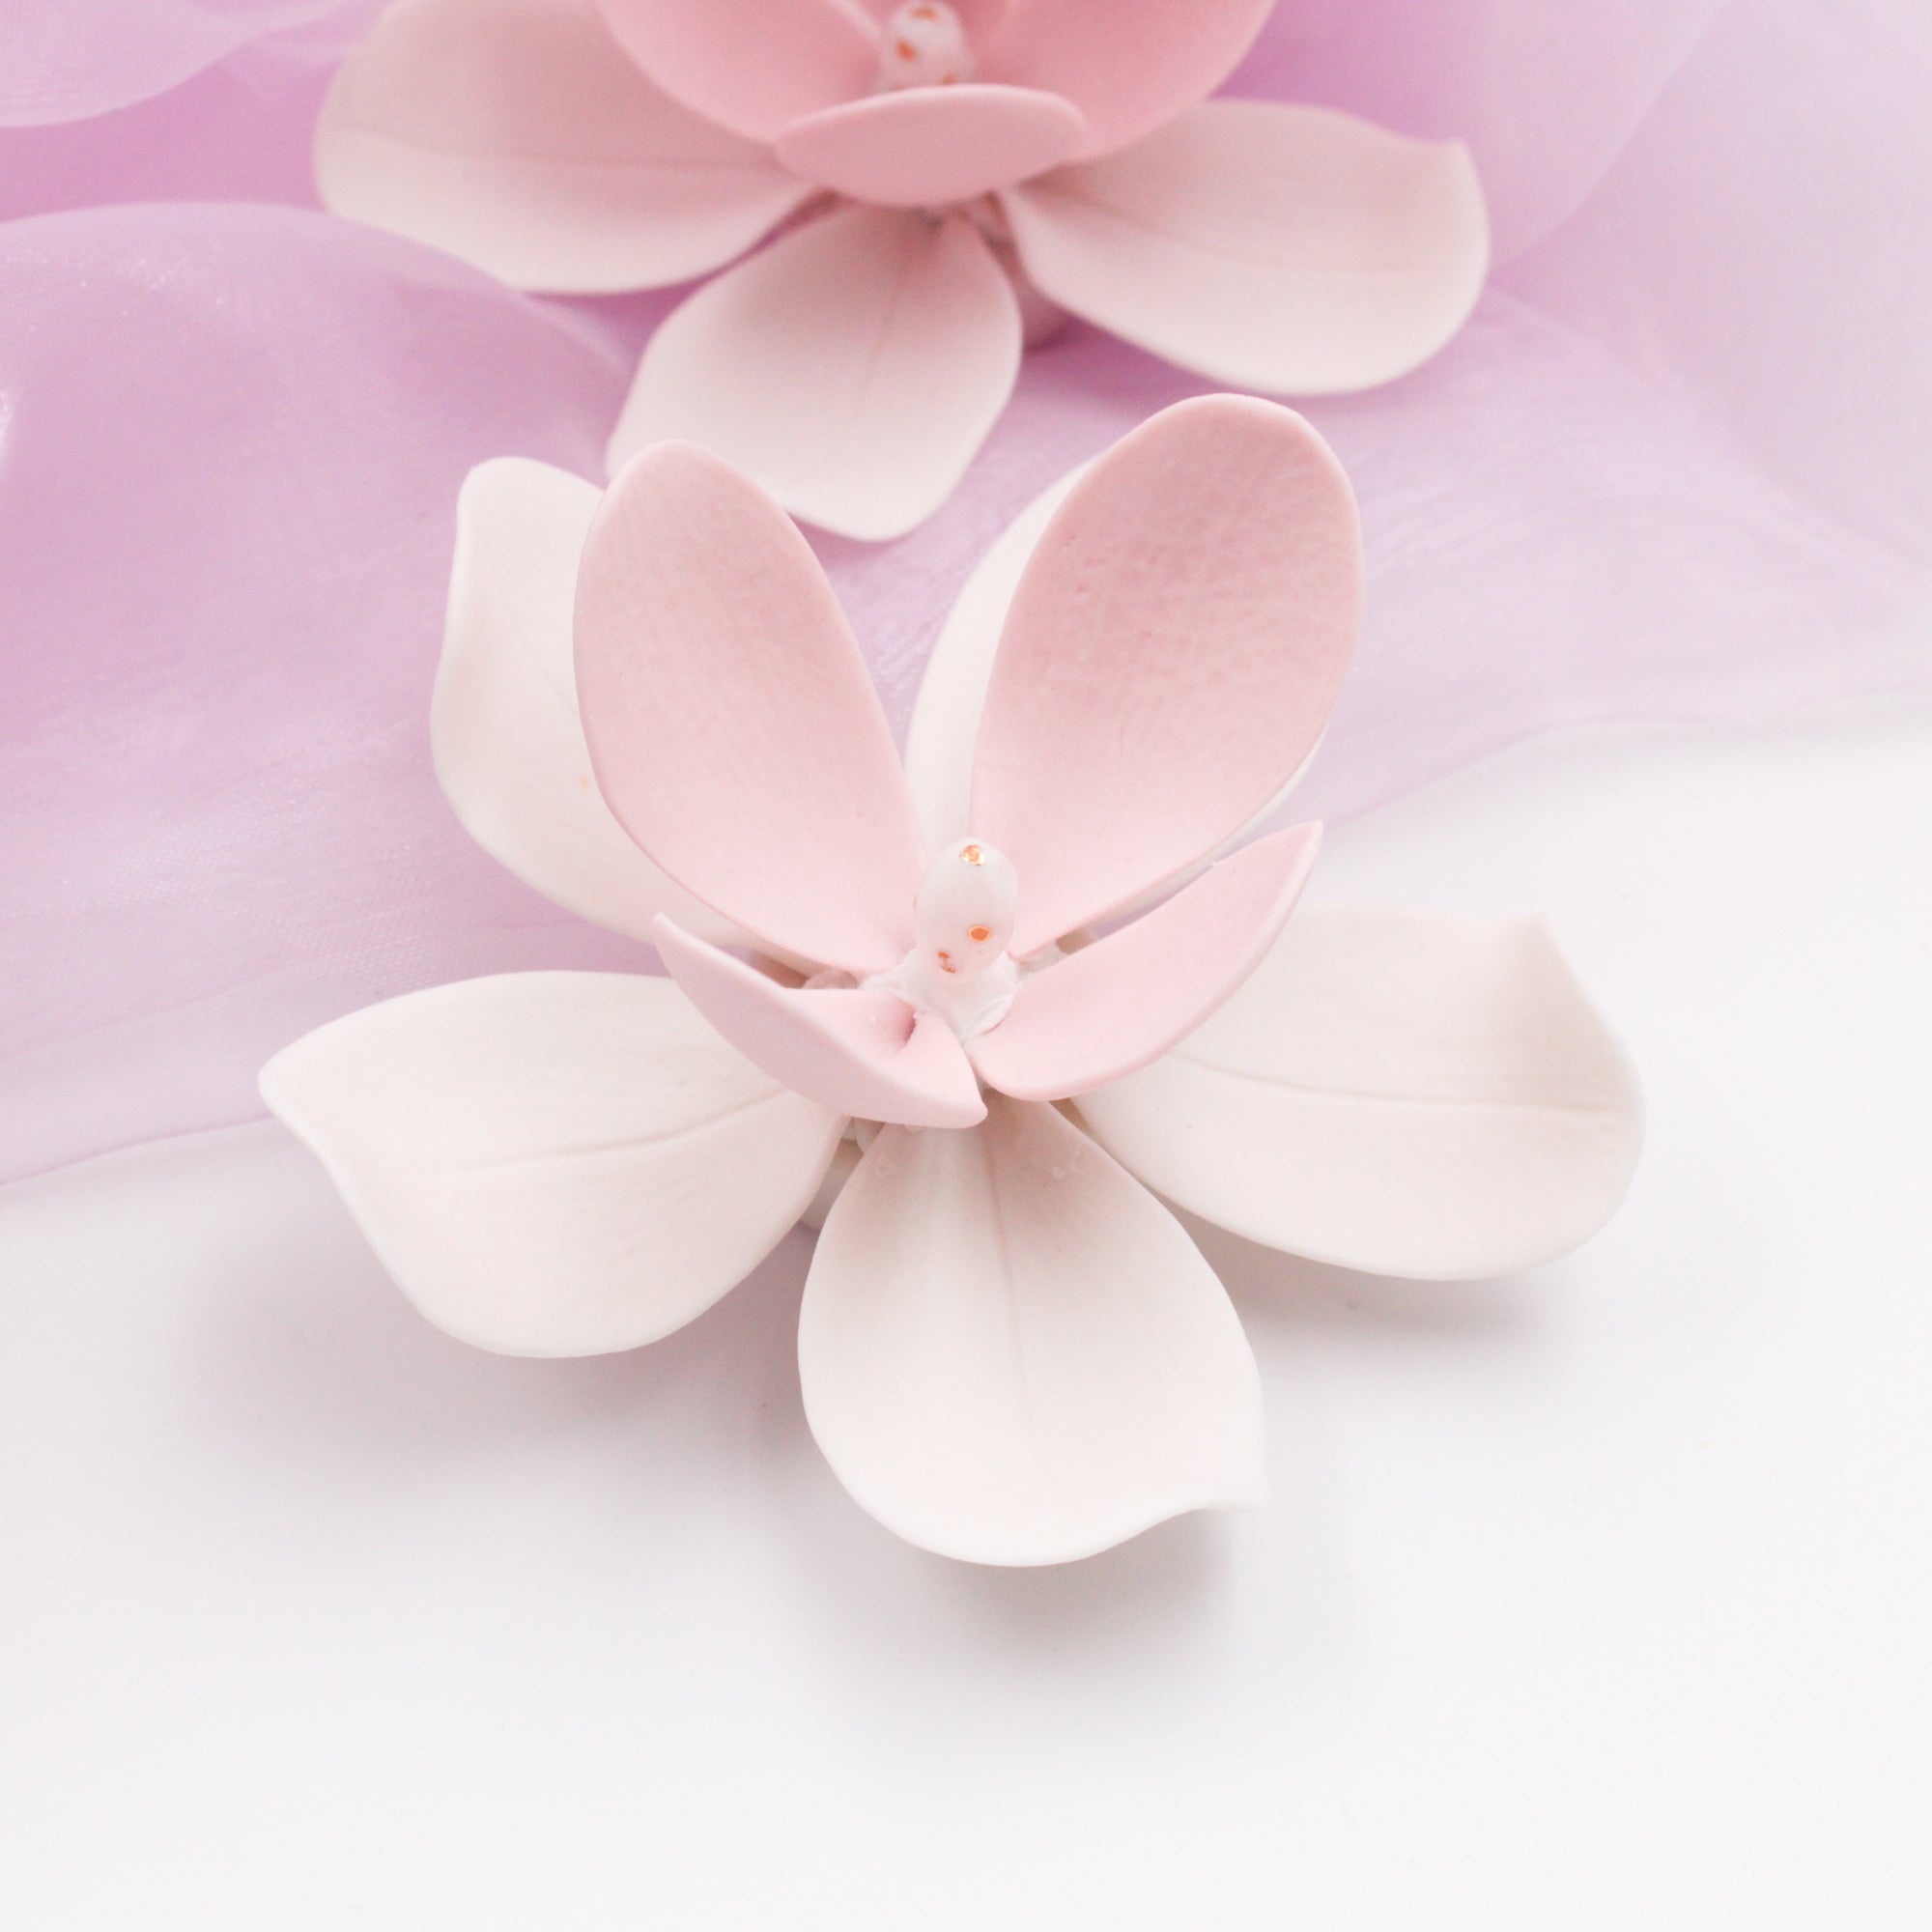 Pink Porcelain Magnolia - Handmade Porcelain Flower for Interior and Event Decoration - Made in France by Alain Granell – Home and Wall Decoration